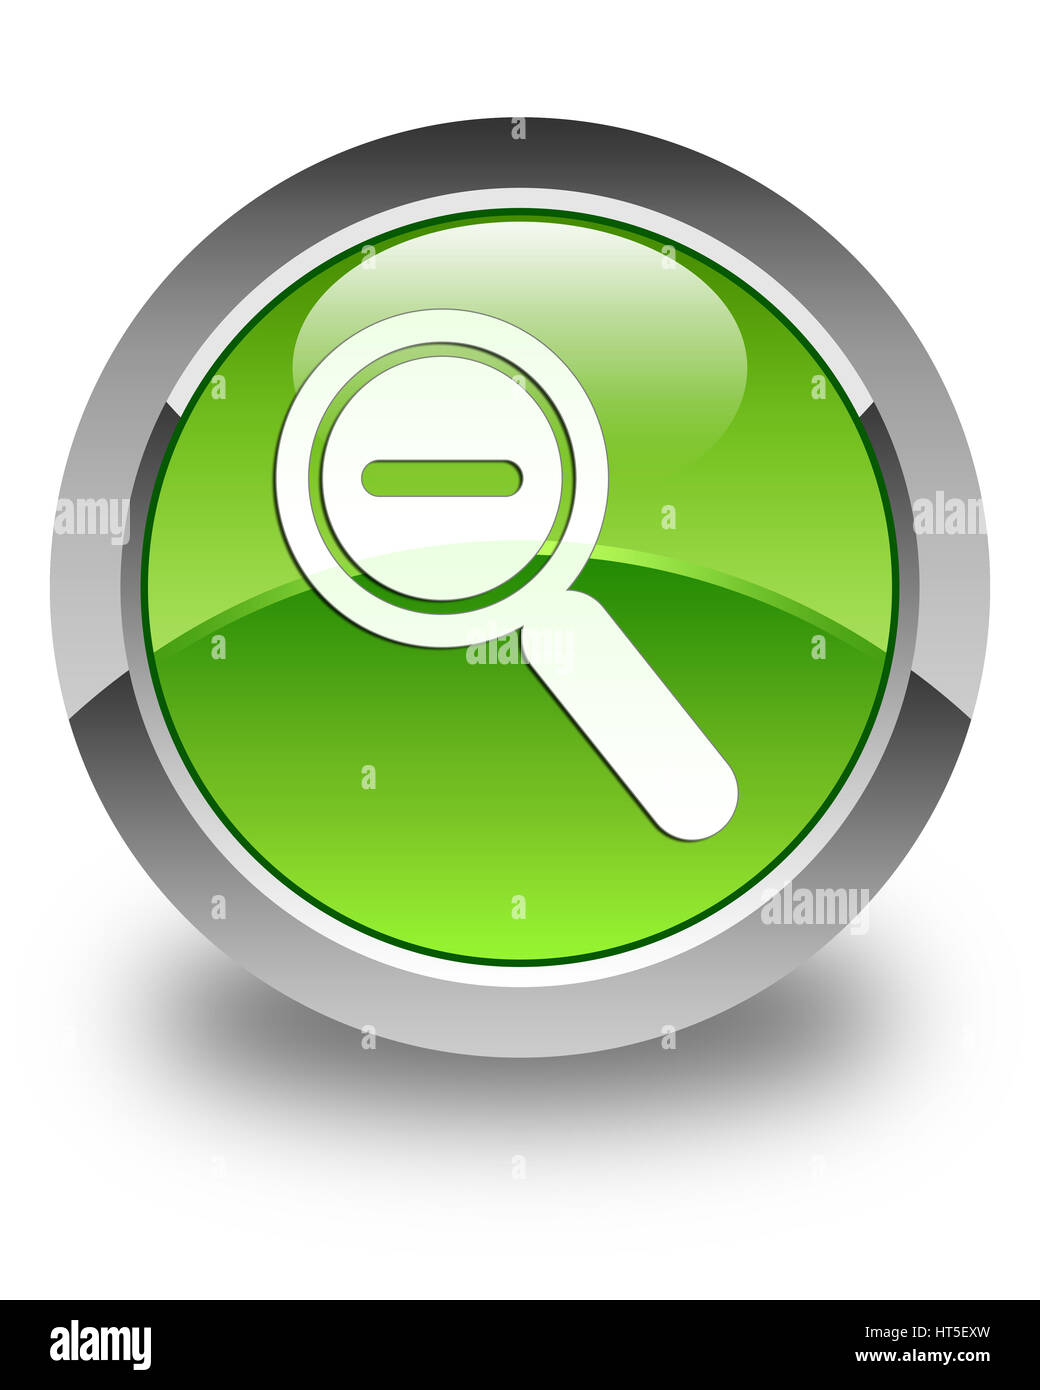 Zoom out icon isolated on glossy green round button abstract illustration Stock Photo